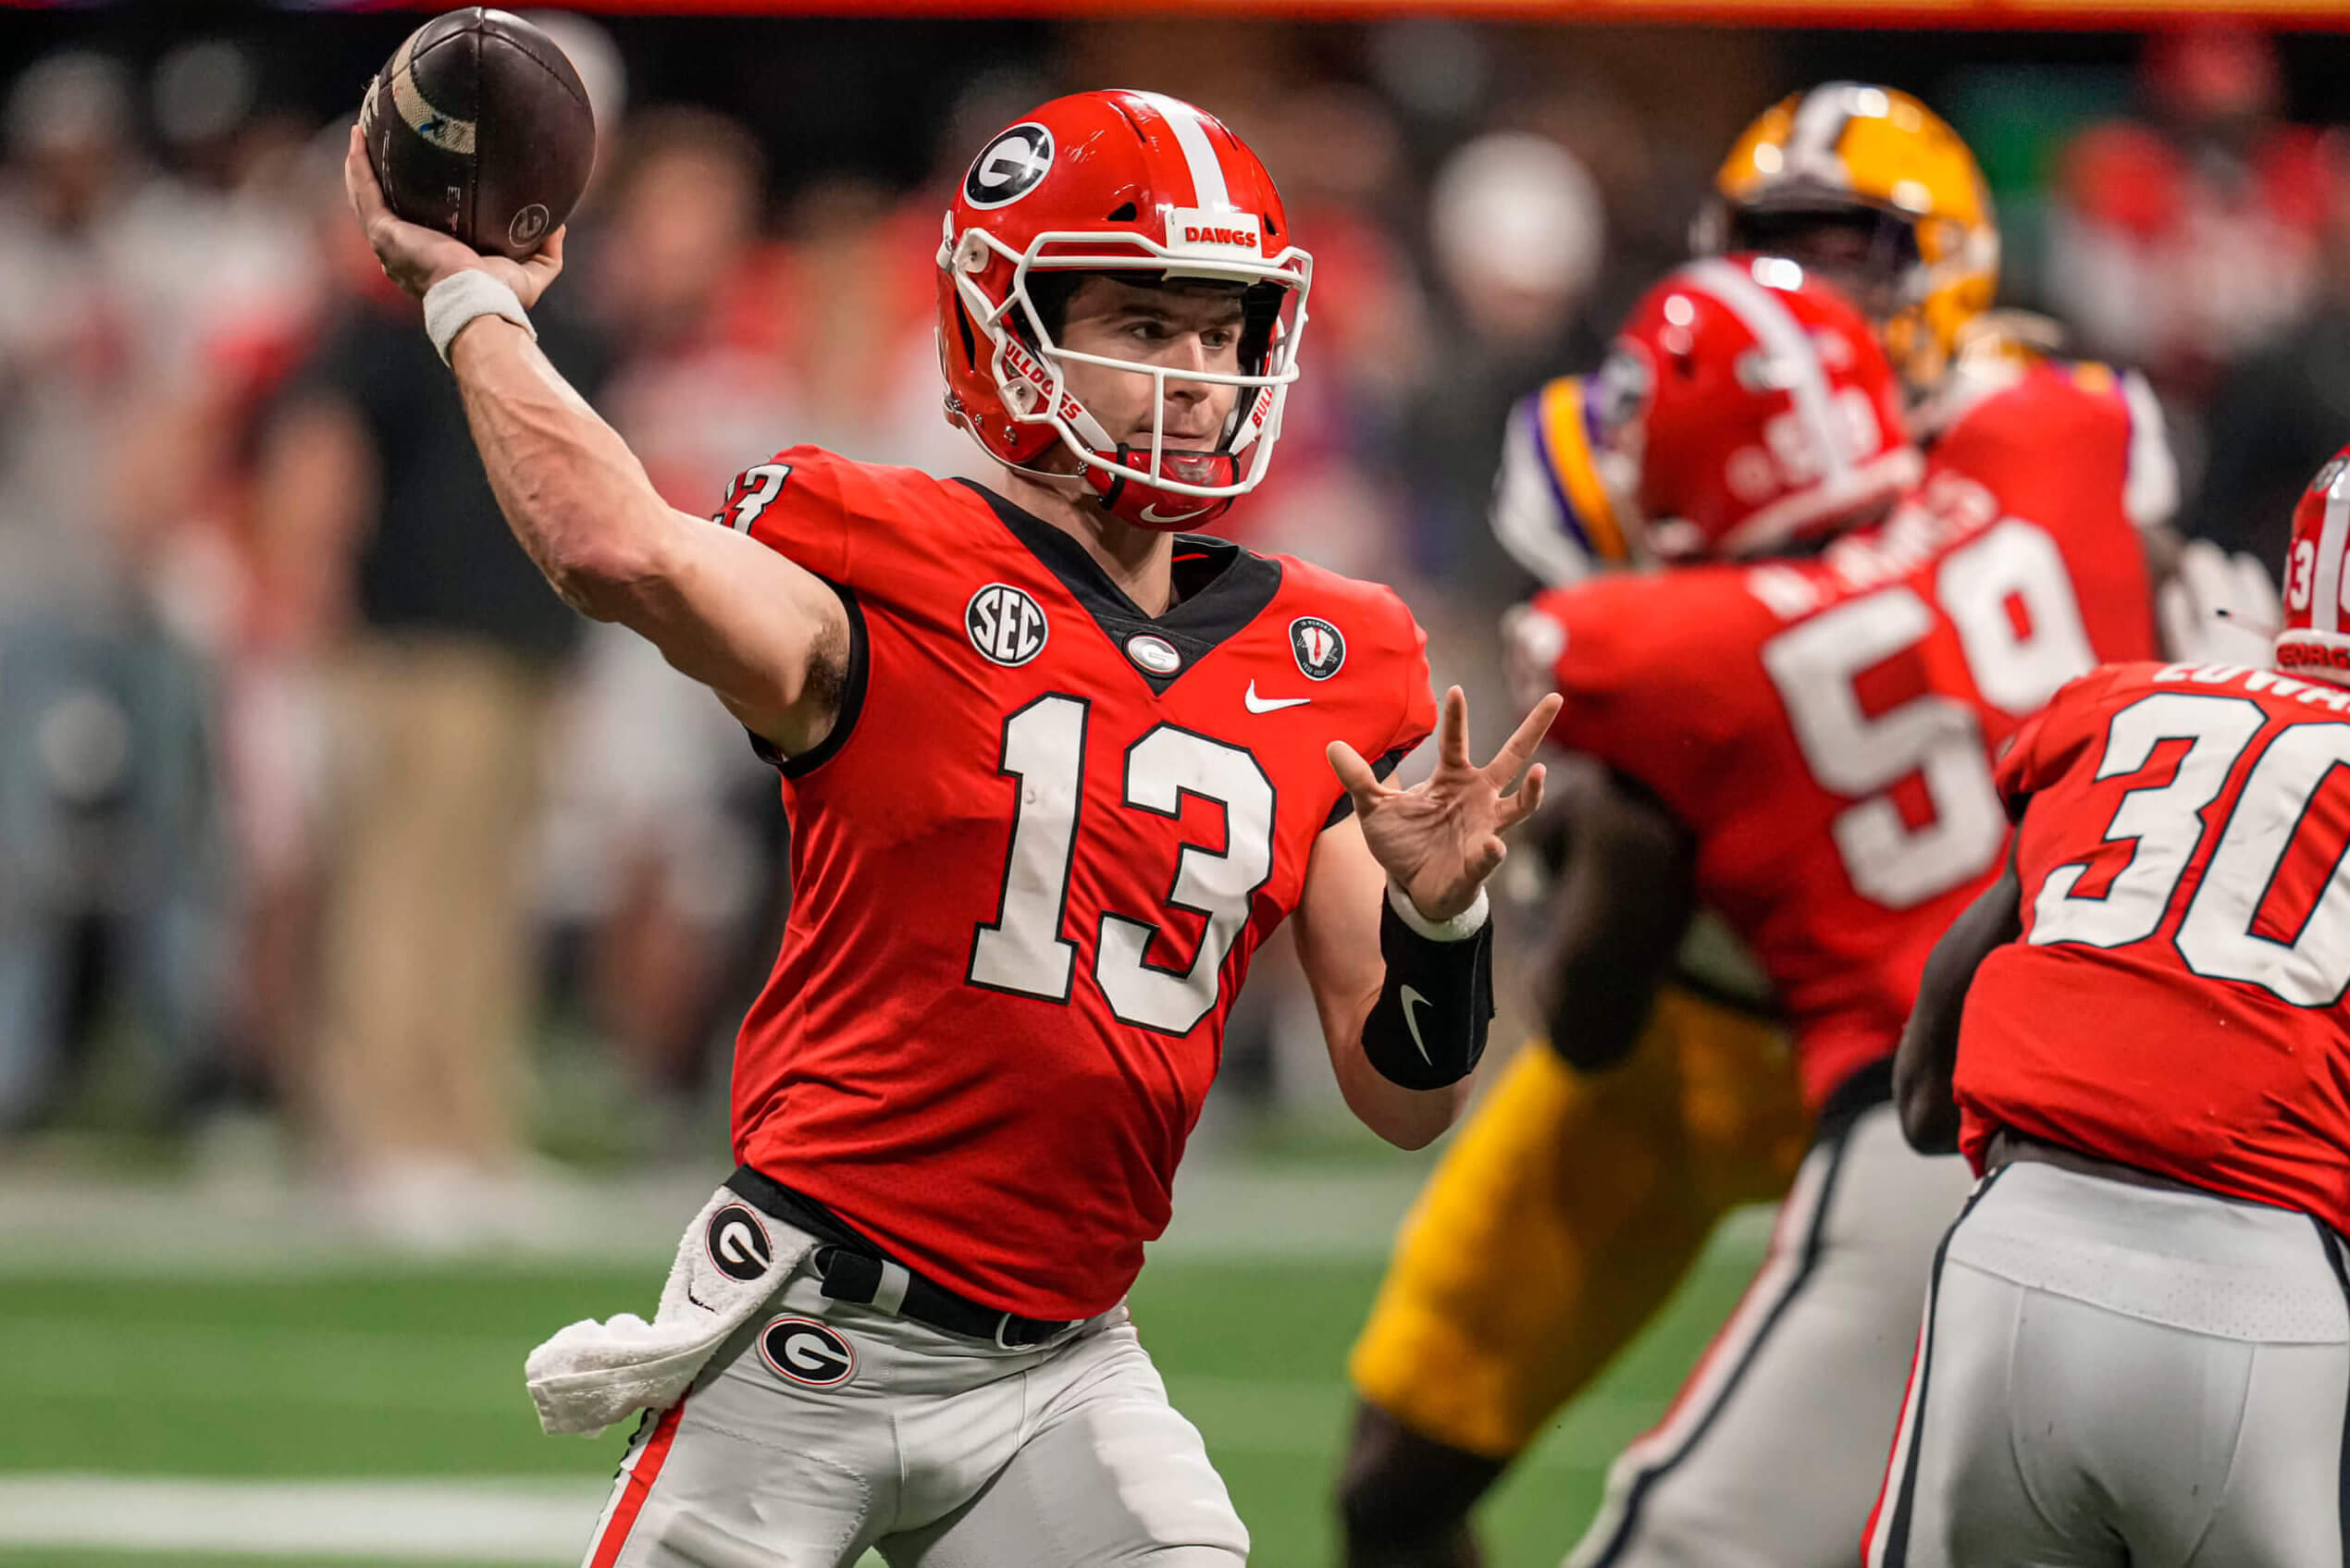 Georgia draws Ohio State in College Football Playoff: 5 early thoughts